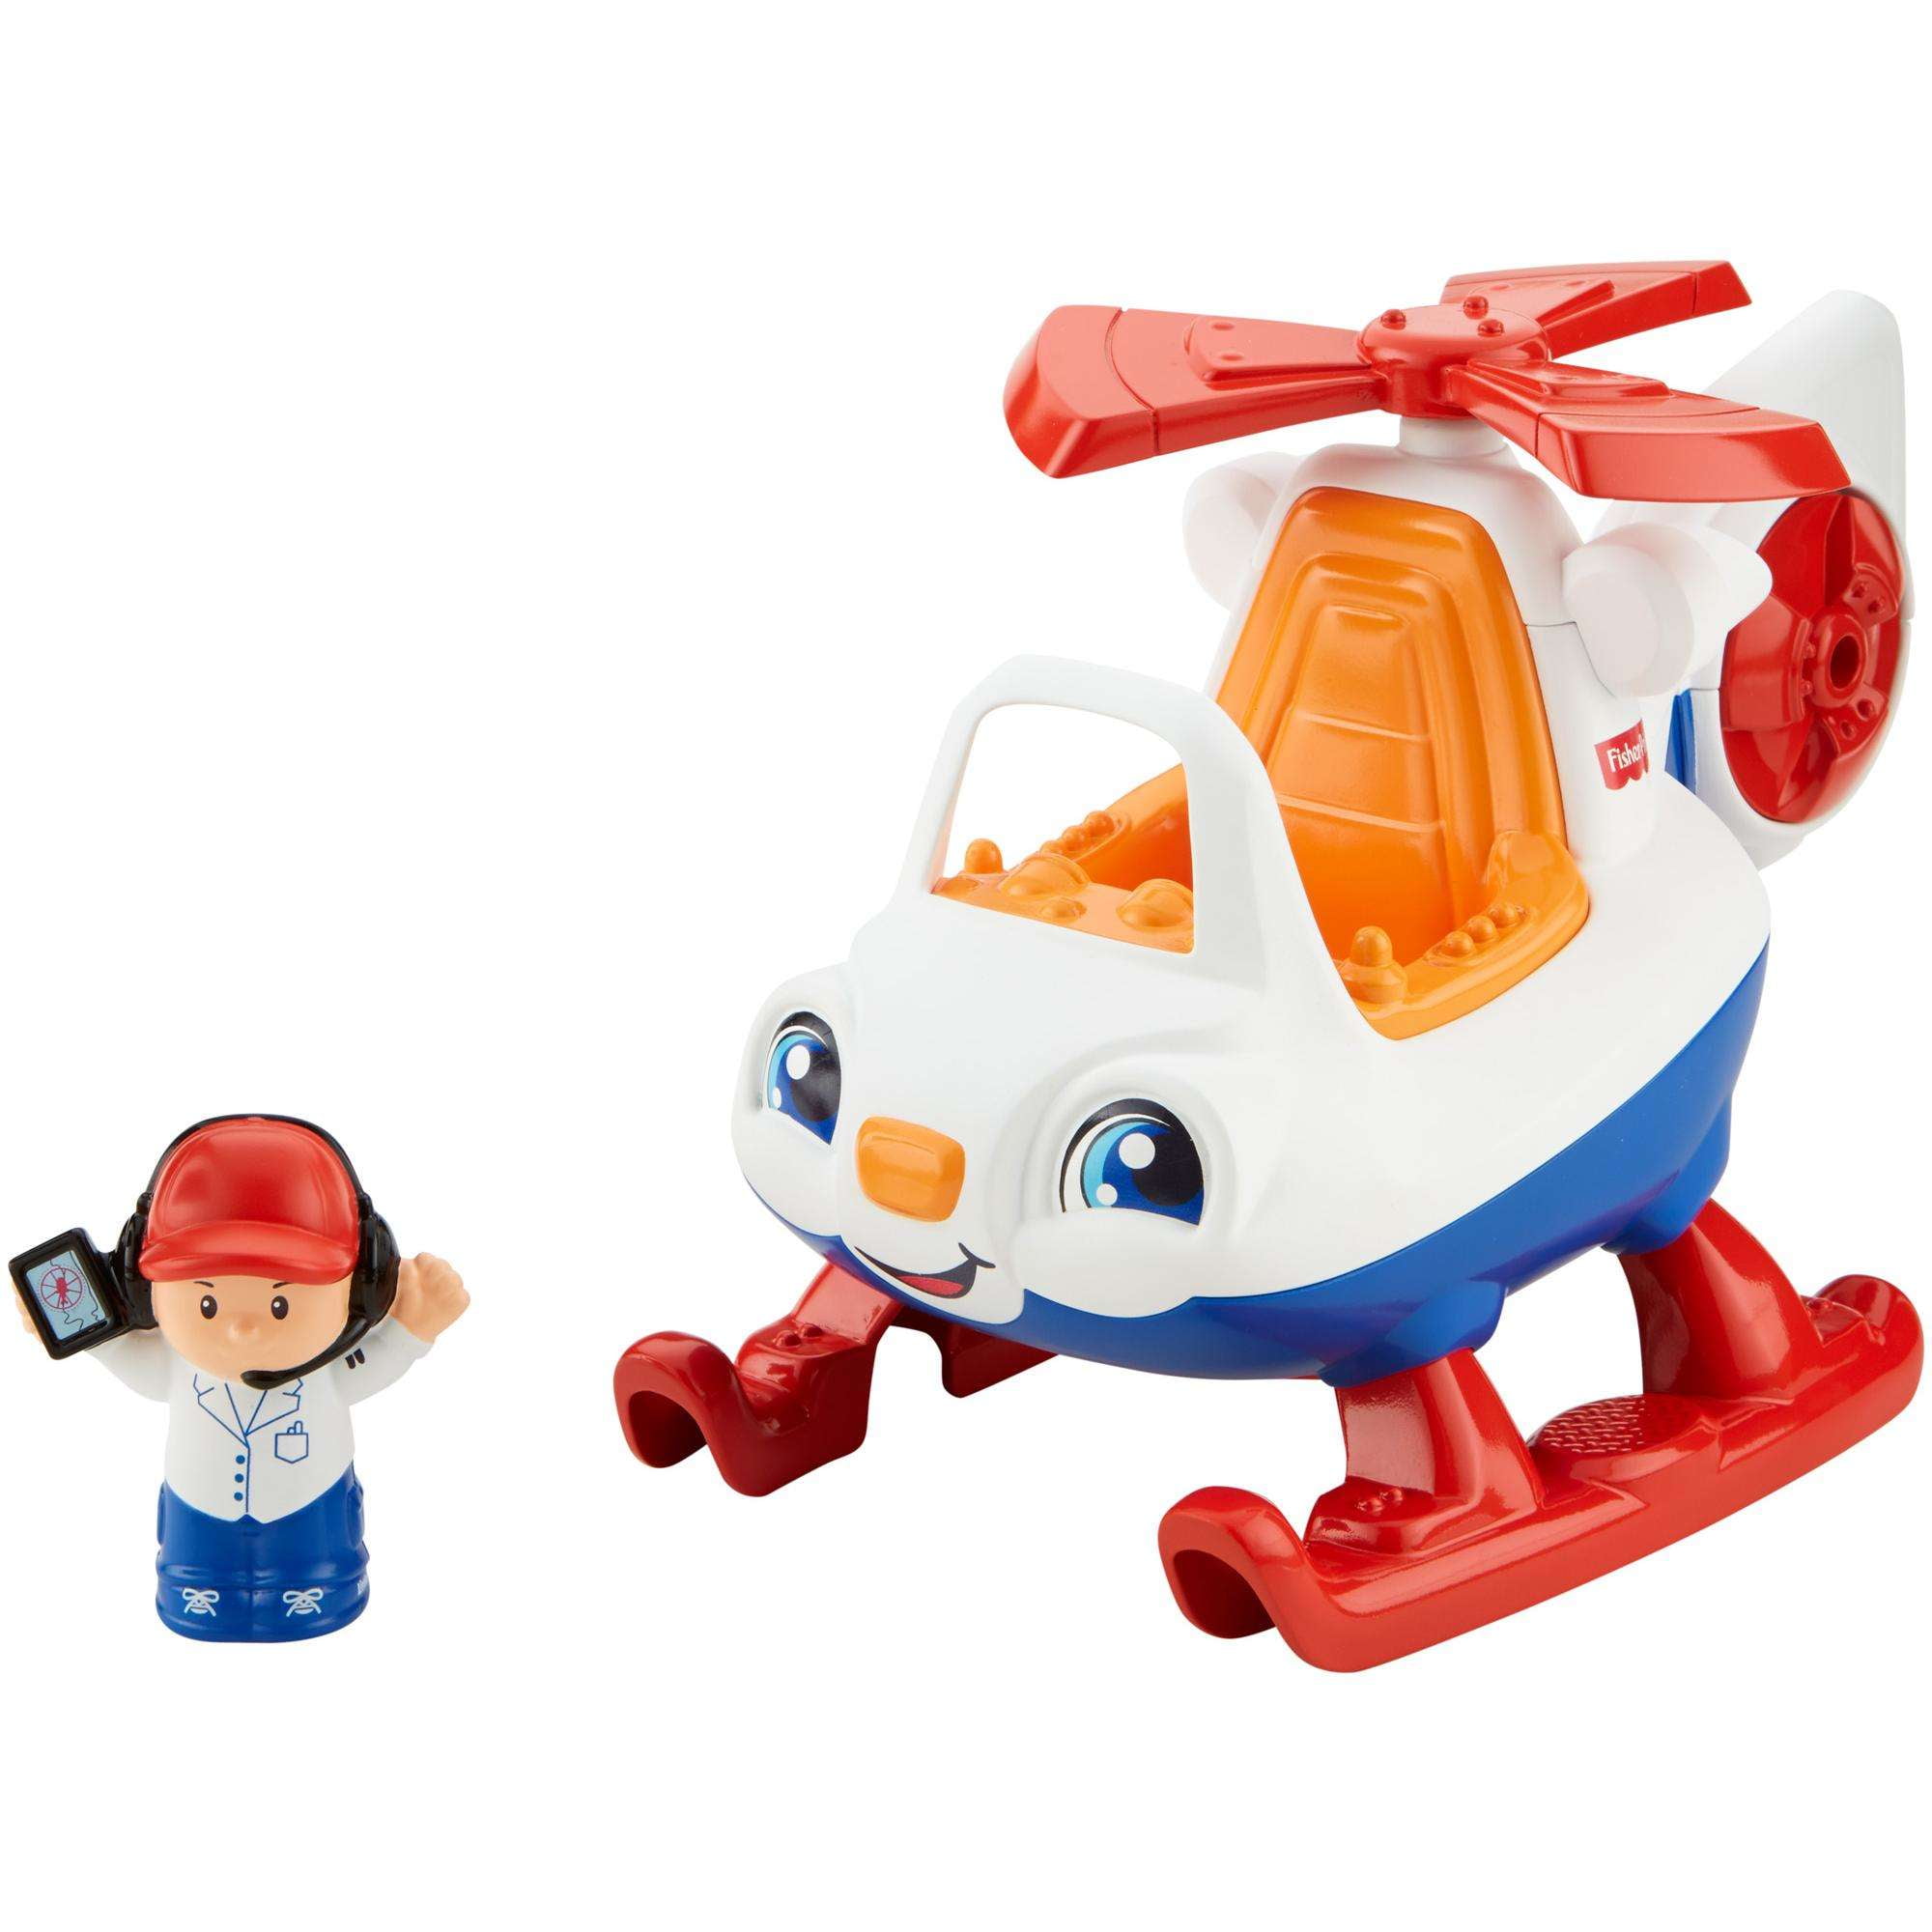 Fisher Price Little People PILOT GIRL PLANE HELICOPTER Airport Airplane red hair 